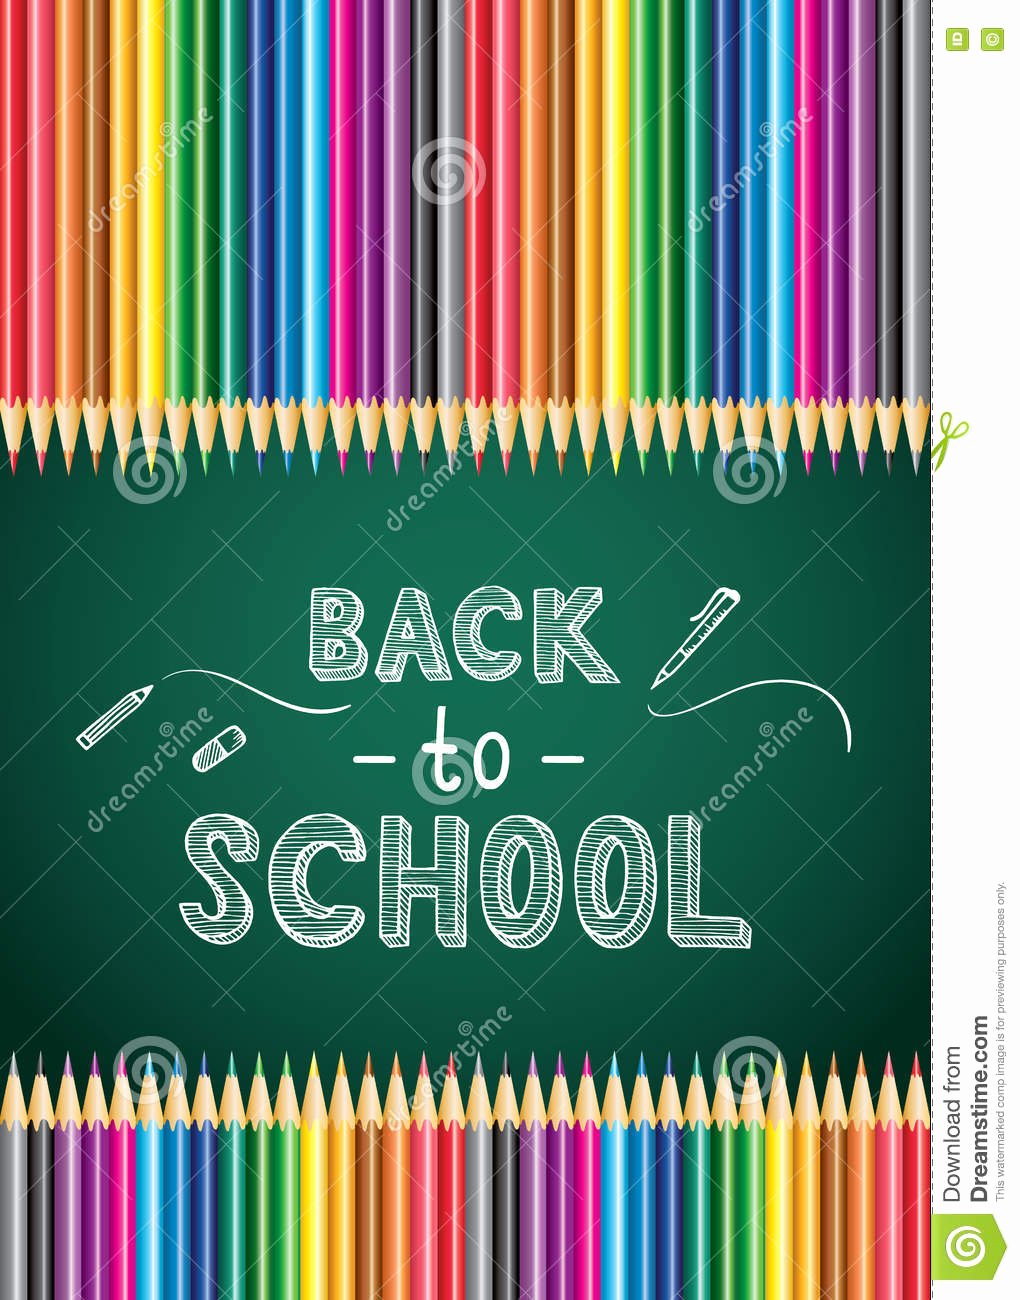 Back to School Flyer Template Best Of Back to School Poster with Color Pencil School Poster Vector Template for Poster Flyer